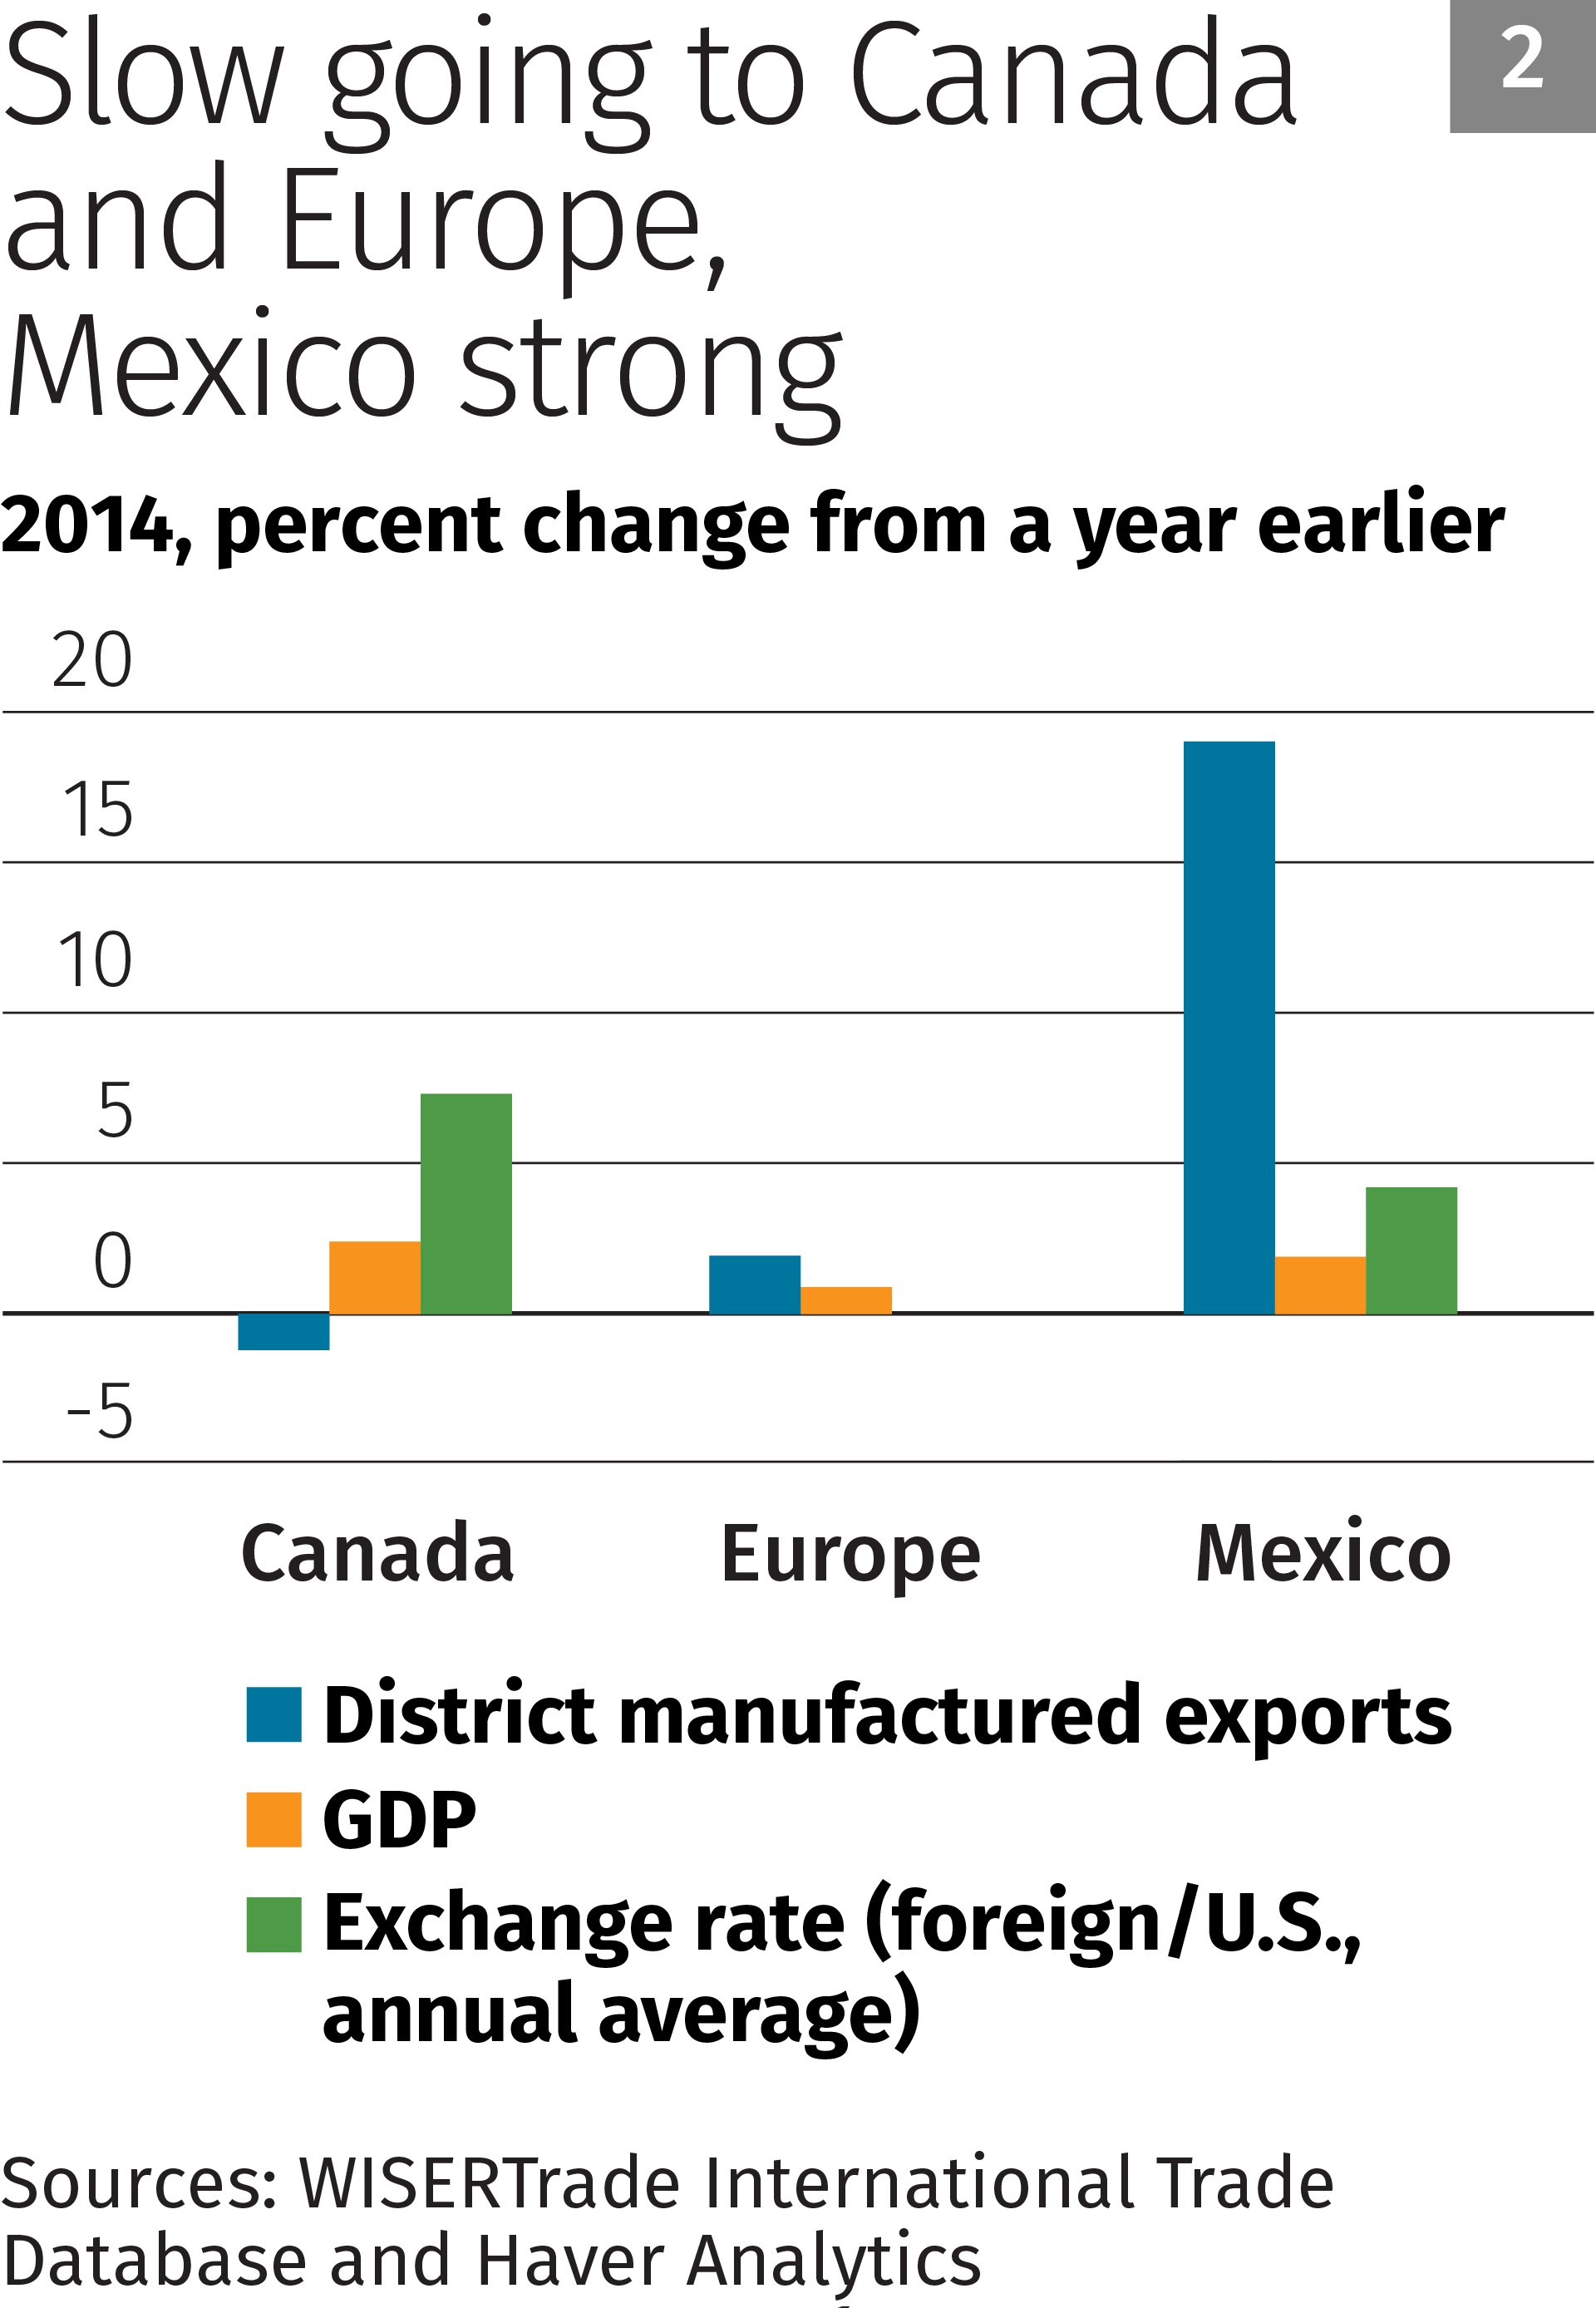 Chart 2: Slow going to Canada and Europe, Mexico strong